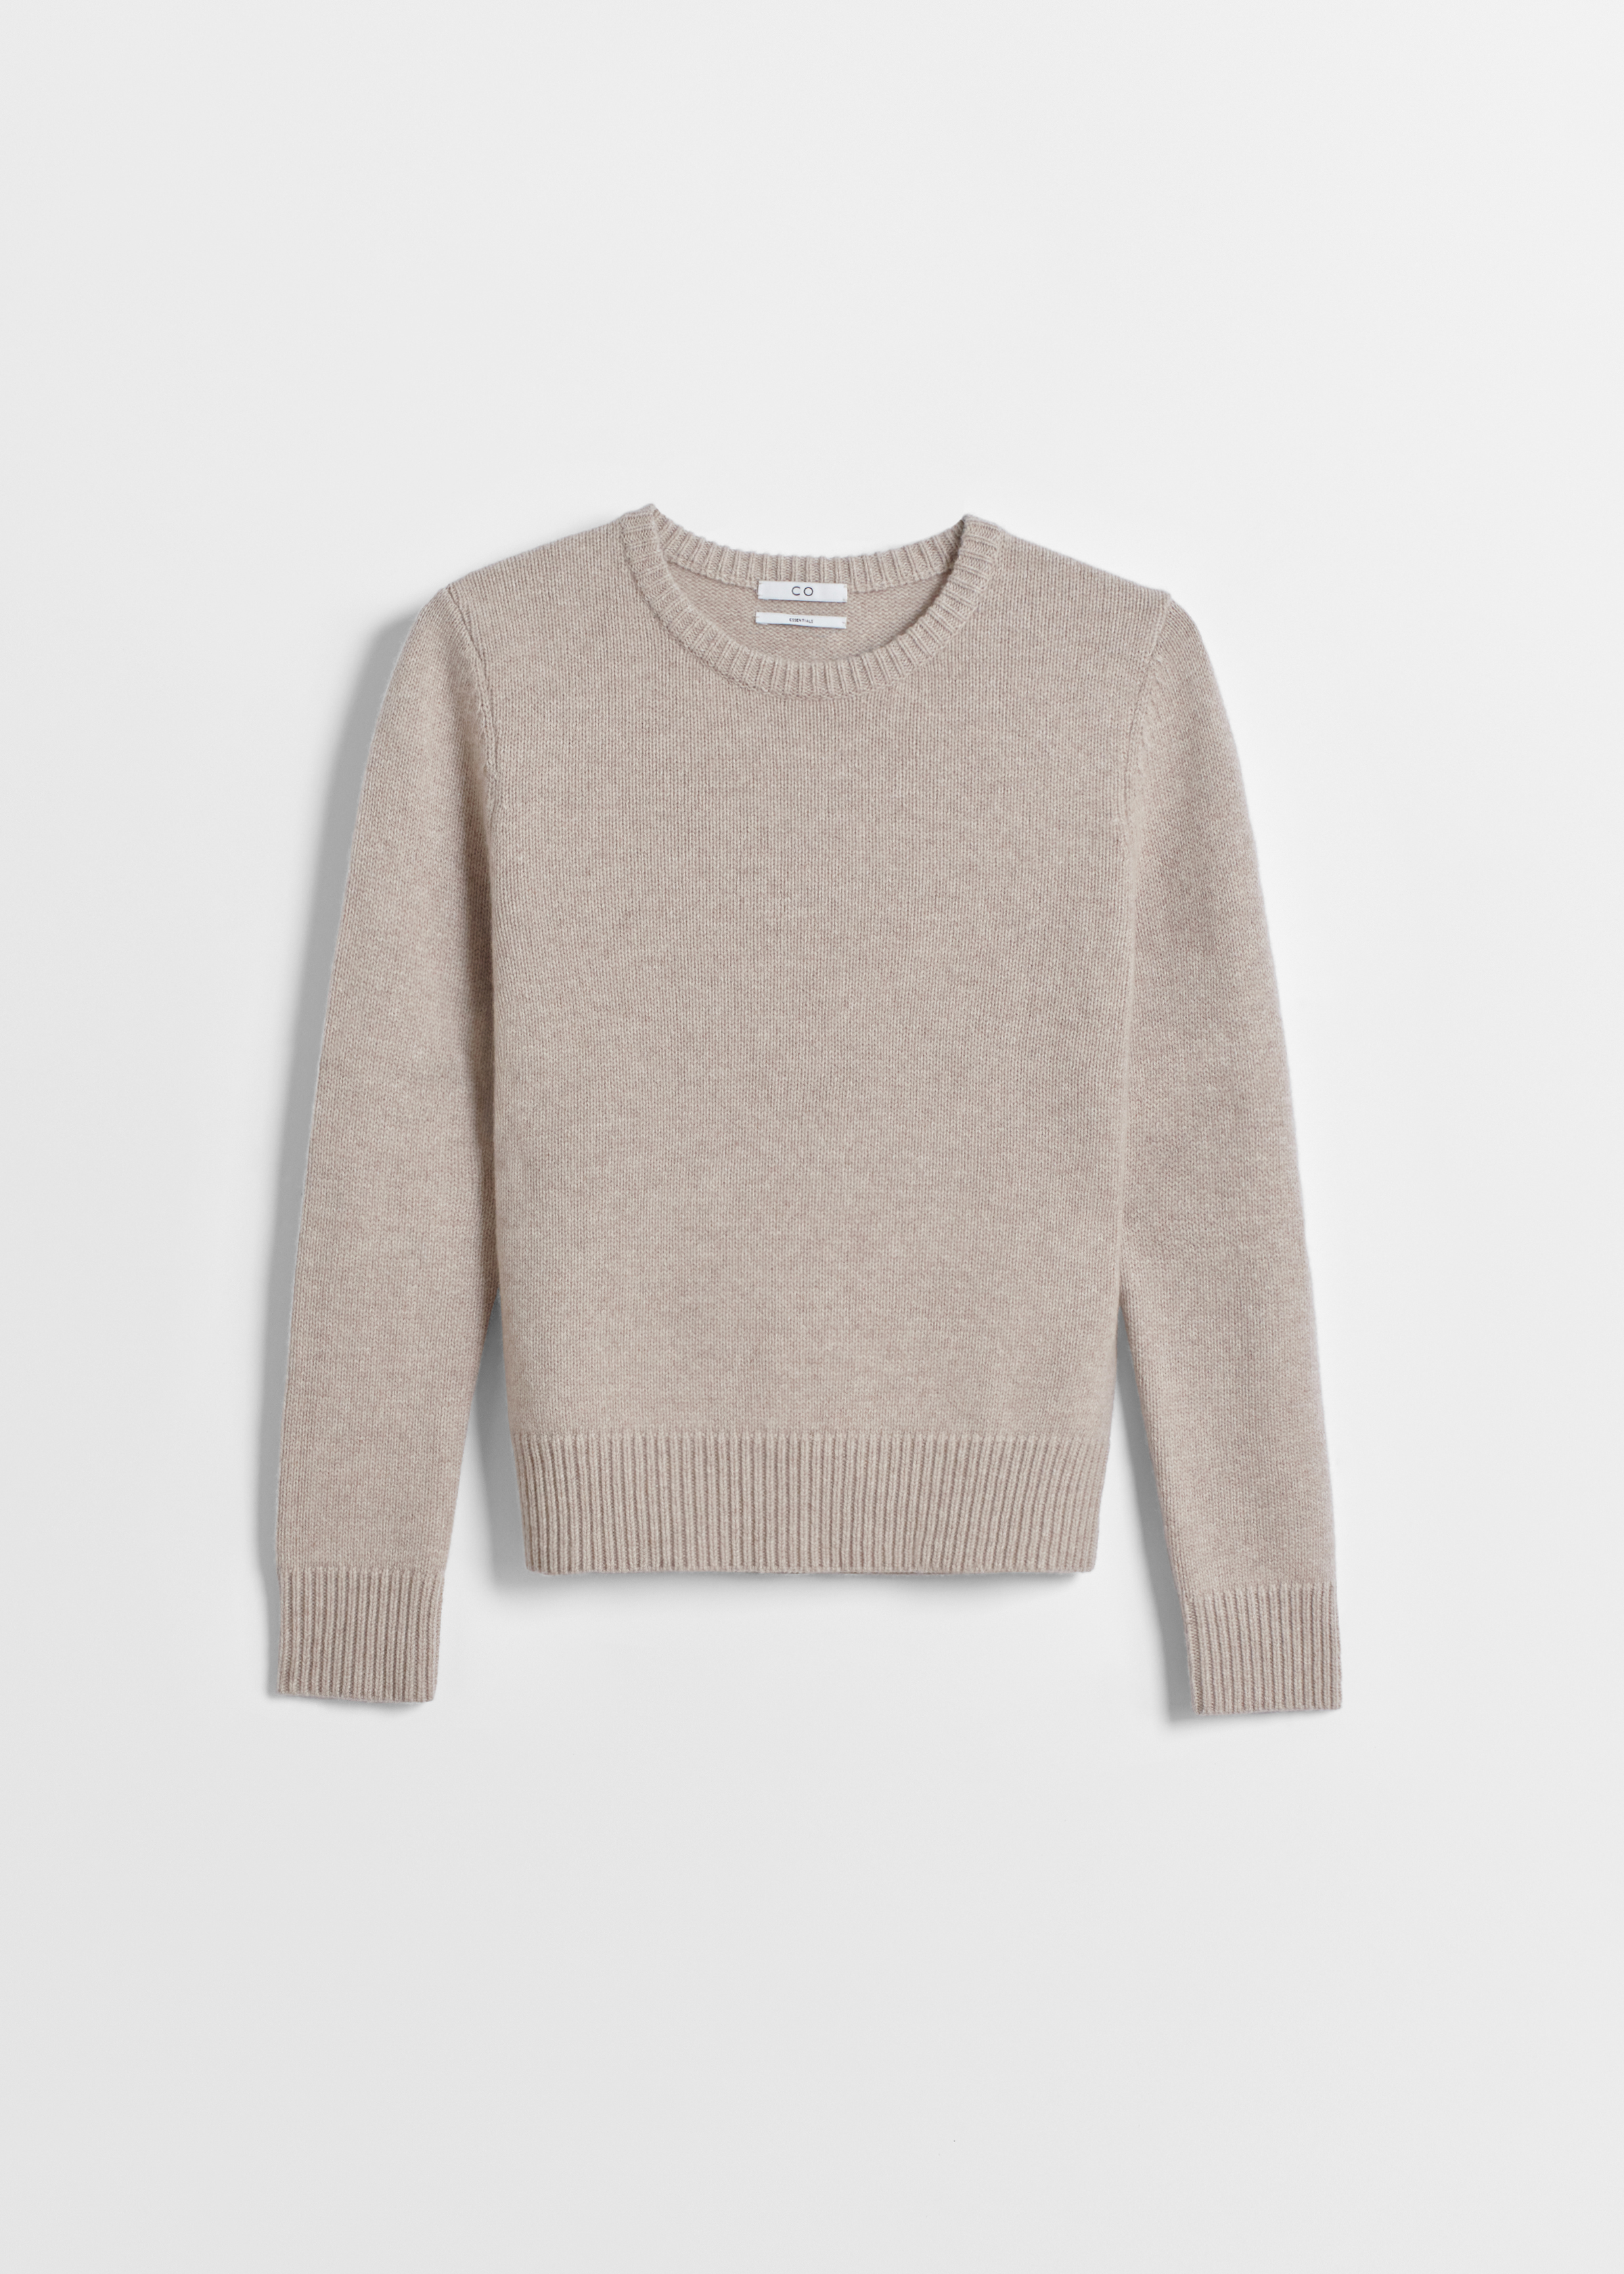 CO - Crew Neck Ribbed Sweater in Cashmere - Black